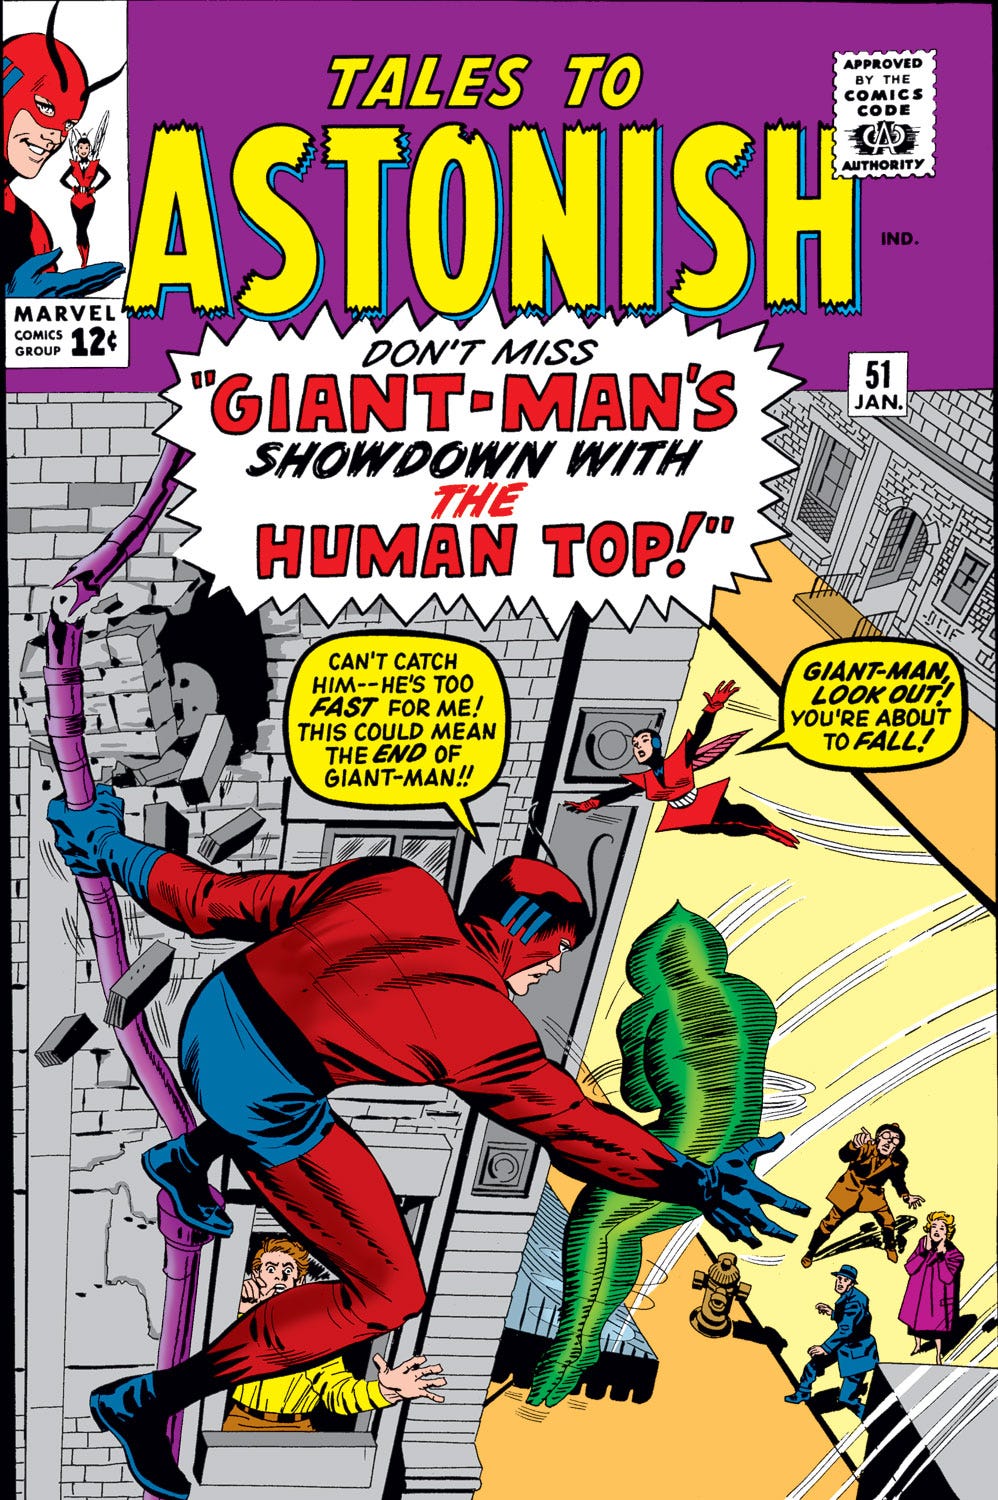 Tales to Astonish (1959) #51 | Comic Issues | Marvel